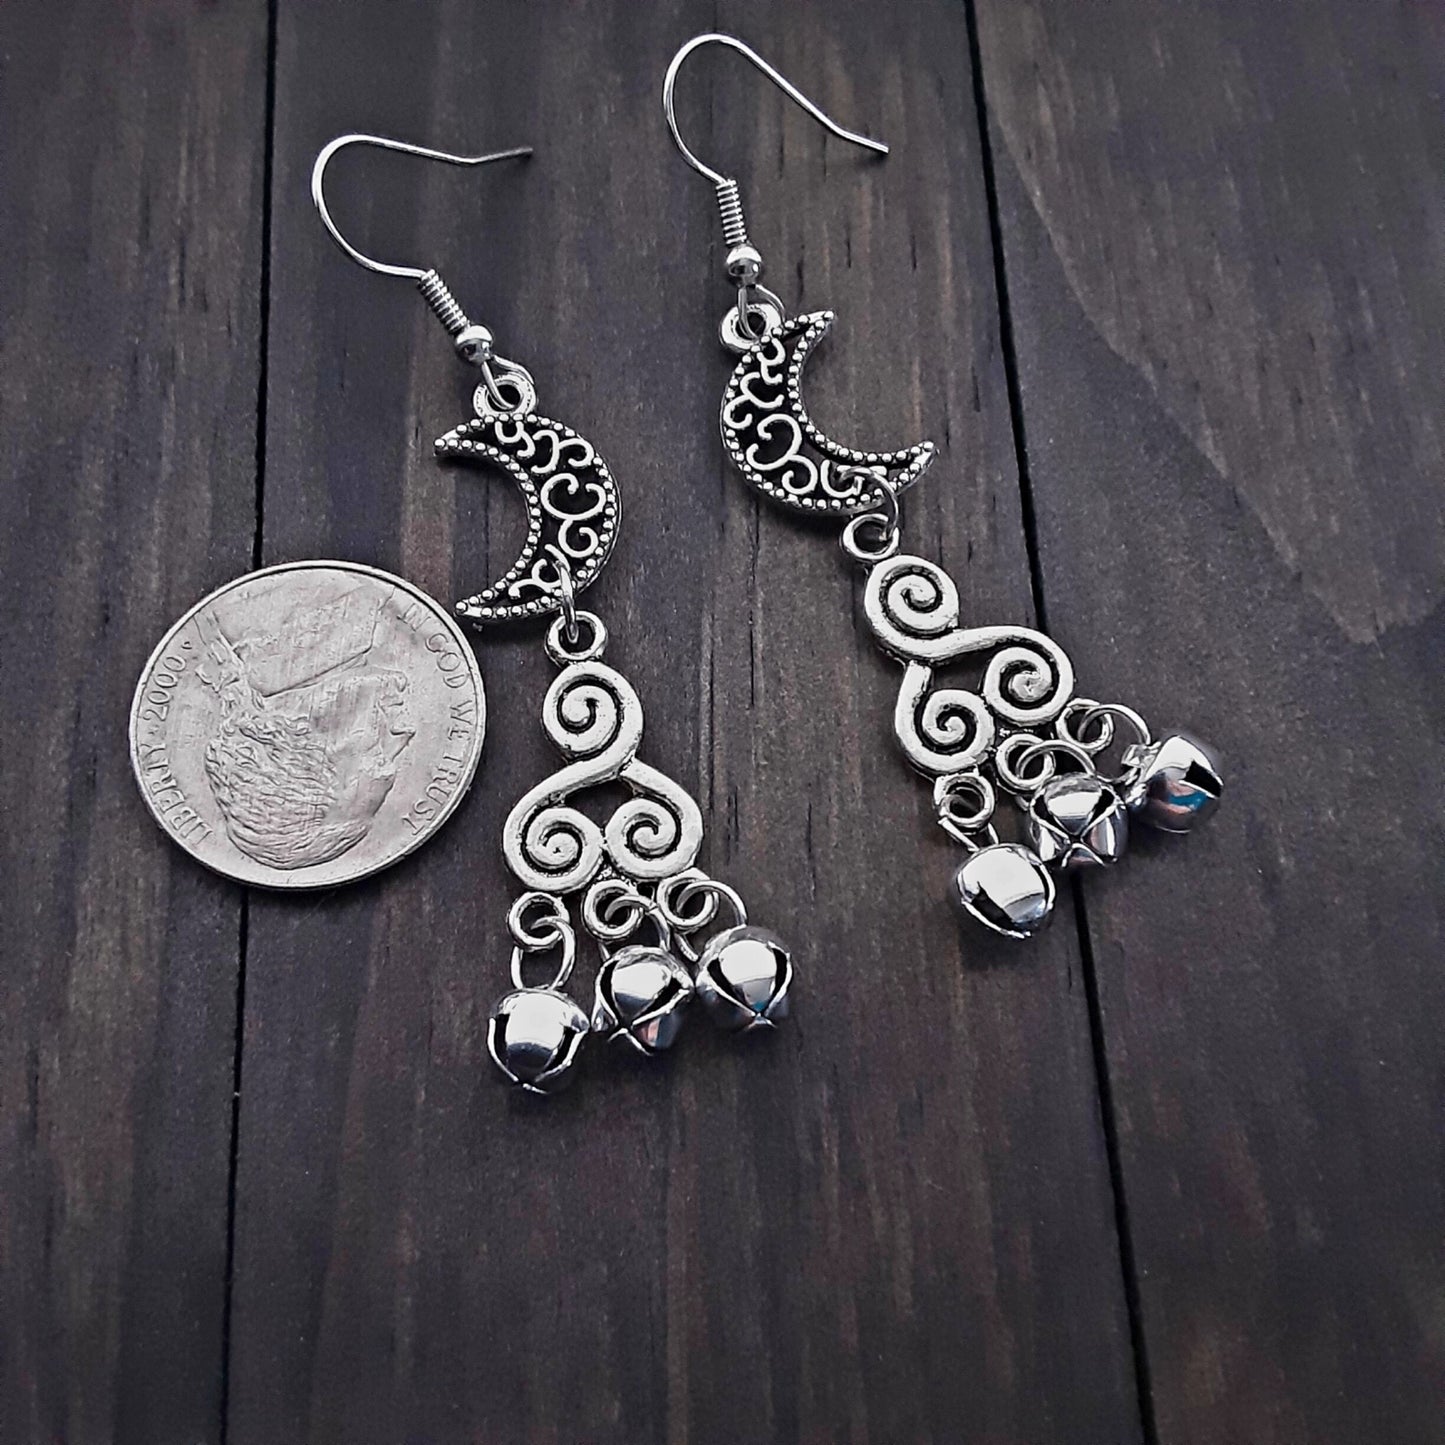 Bell earrings with crescent moons and Triskele links Sound cleansing jewelry